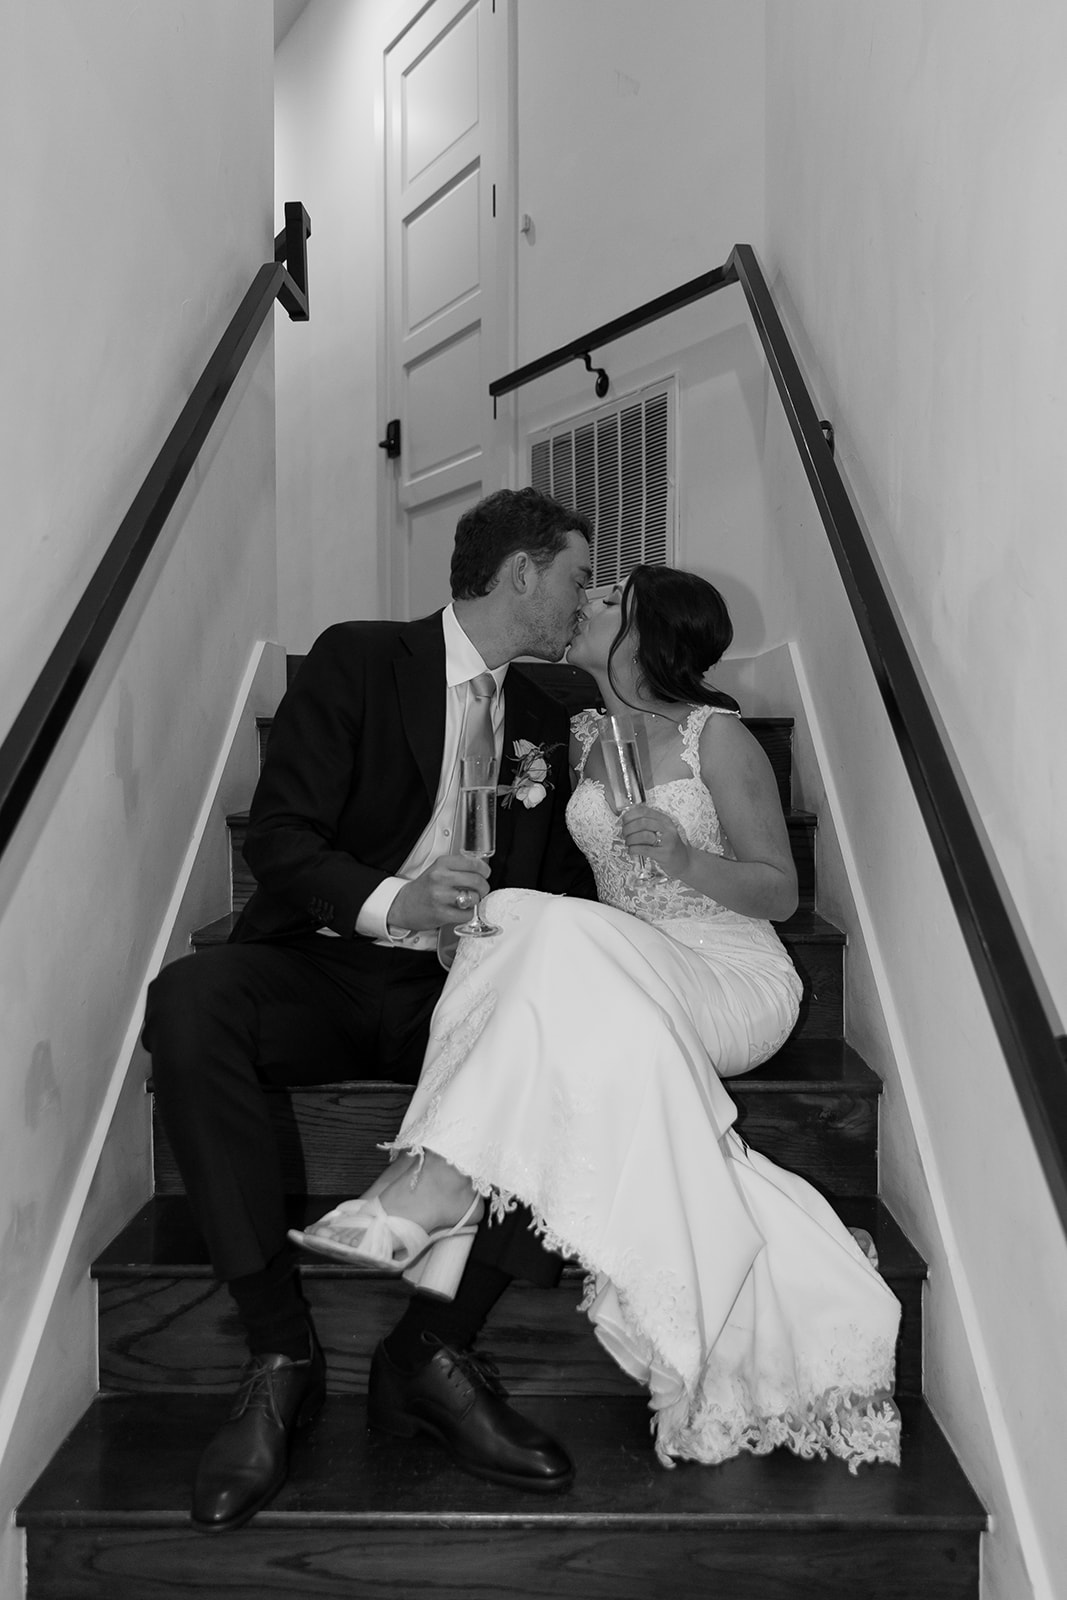 Bride and groom sitting on steps with champagne